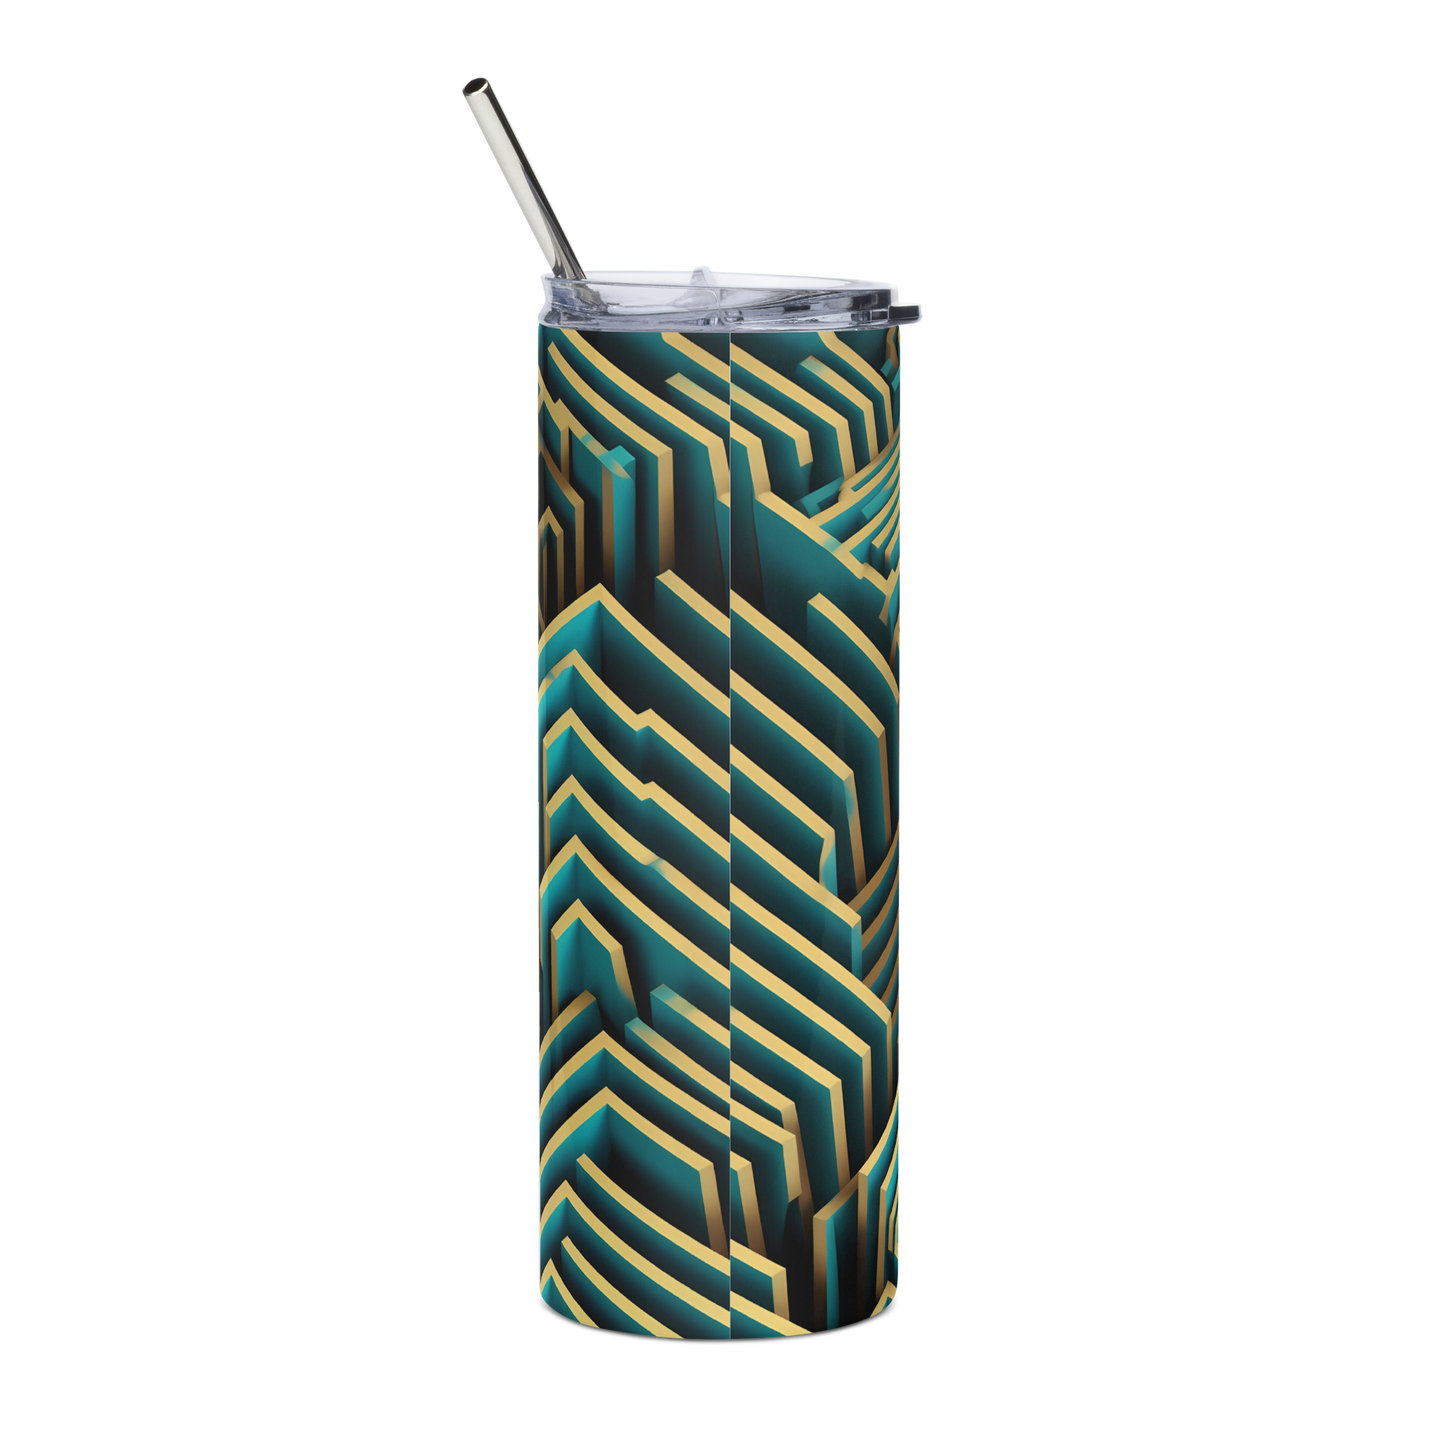 3D Maze Illusion | 3D Patterns | Stainless Steel Tumbler - #5